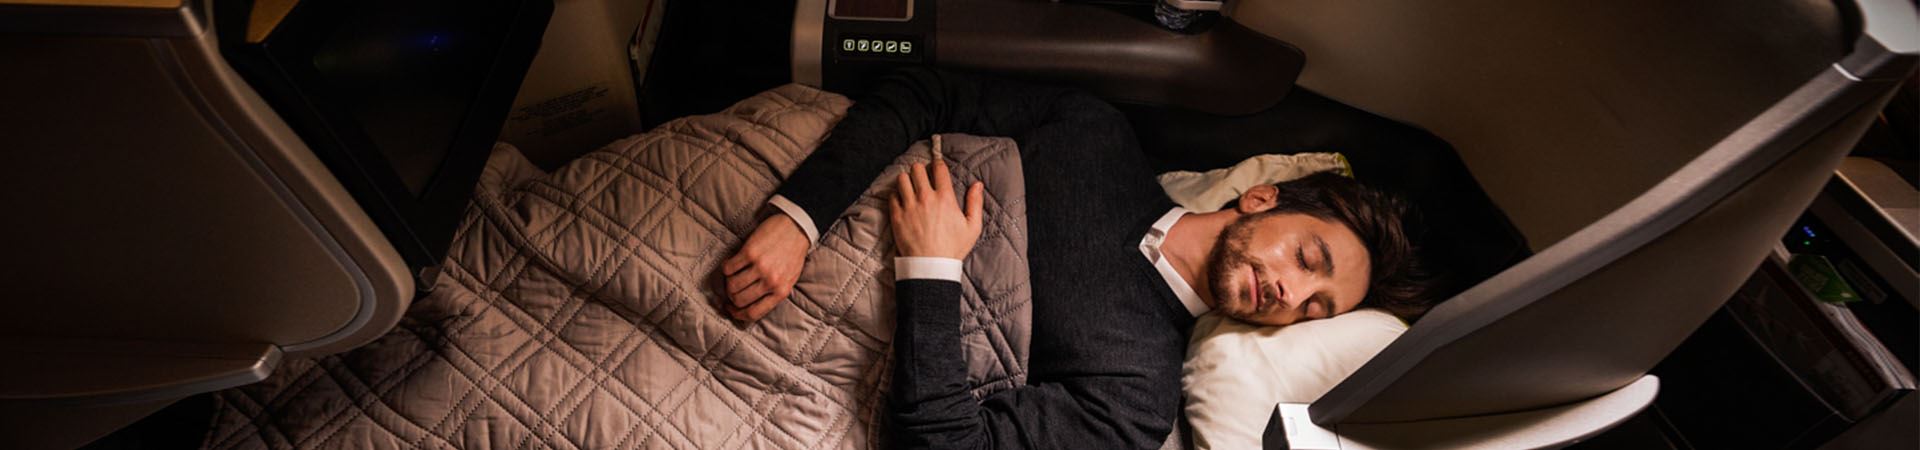 Low light environment. We see a young man lying down, eyes closed, on an Executive Class bed. His head is on the headboard and is covered with a gray duvet. Above his legs hangs, suspended, a TV screen.